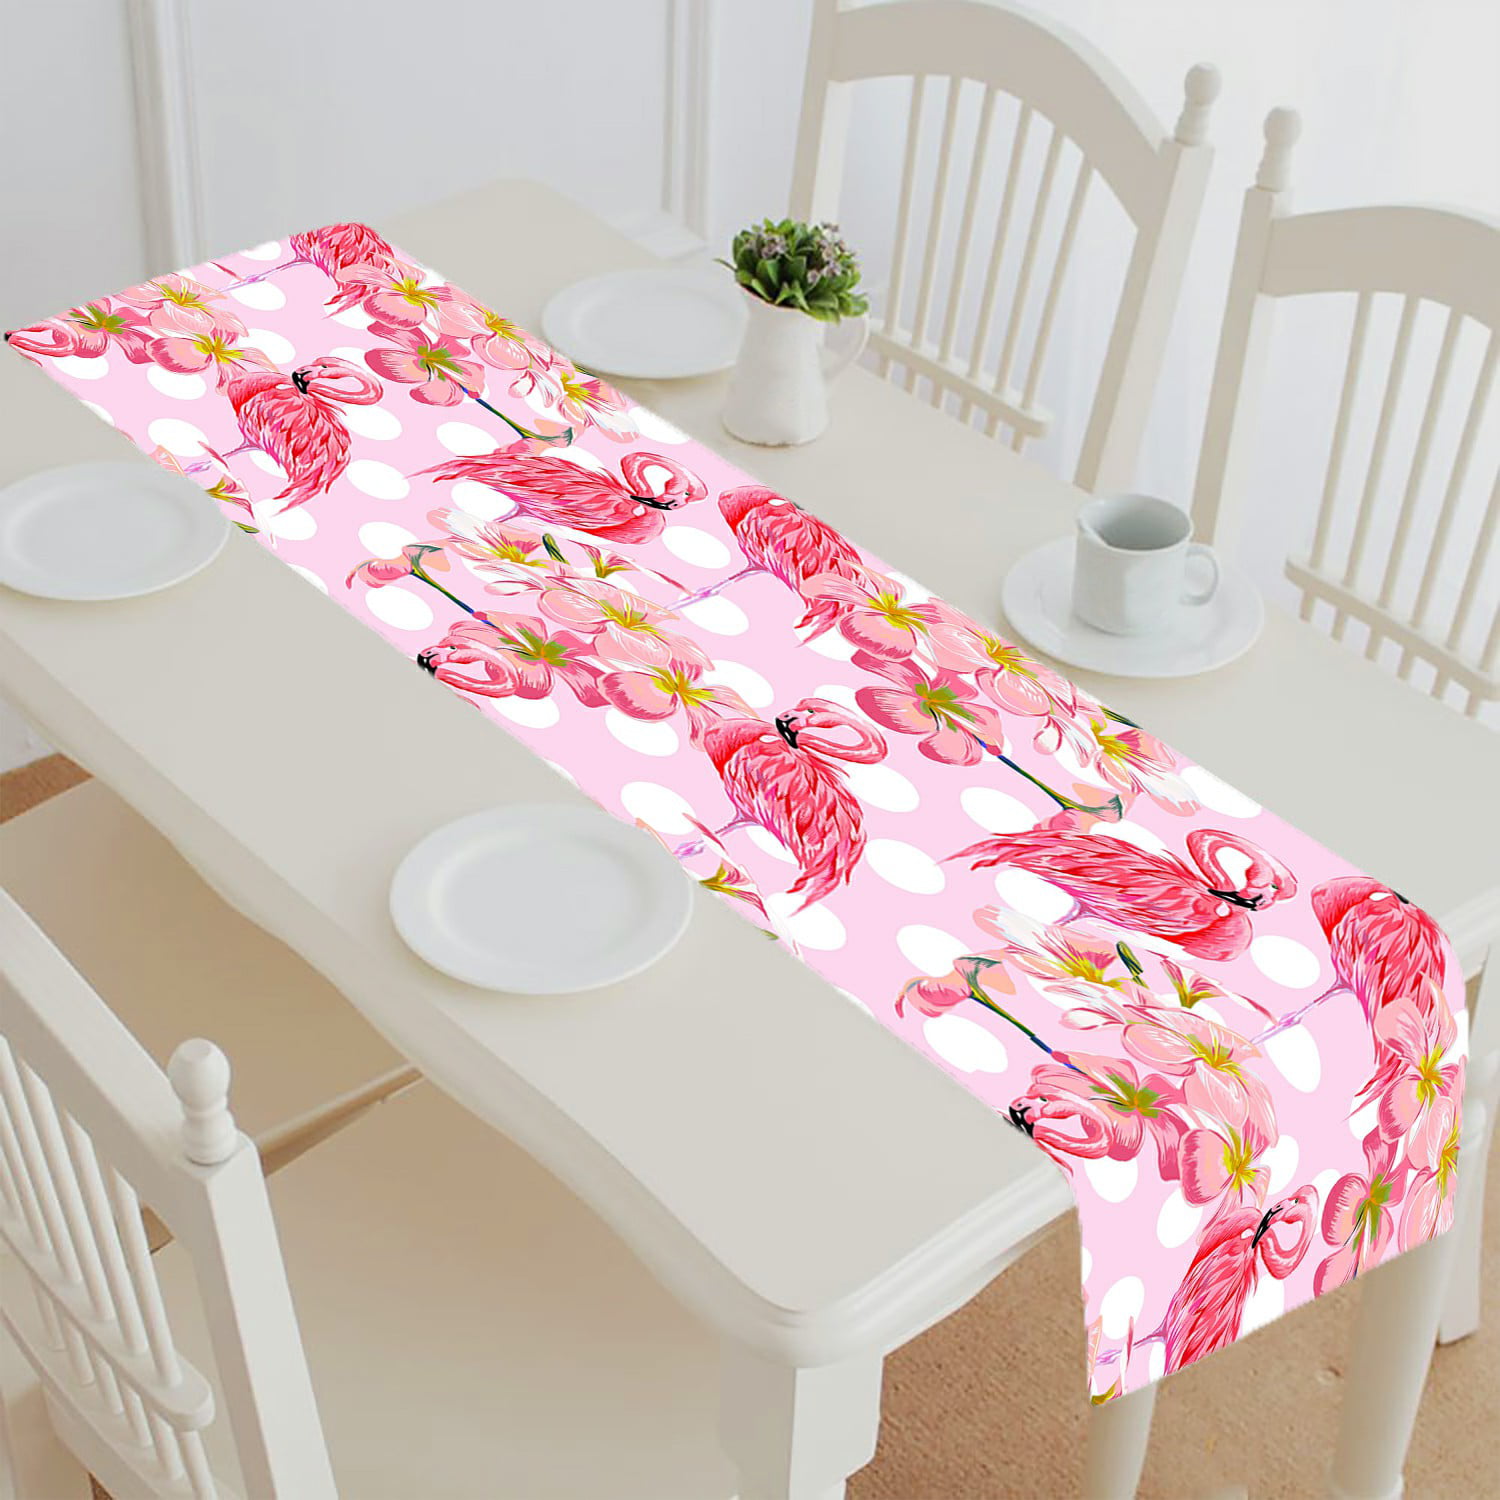 Hot Pink Table Runner Table Cloth 12 x 72 for Baby Party Gender Reveal Party Weddings Anniversary Ideas Home Decor